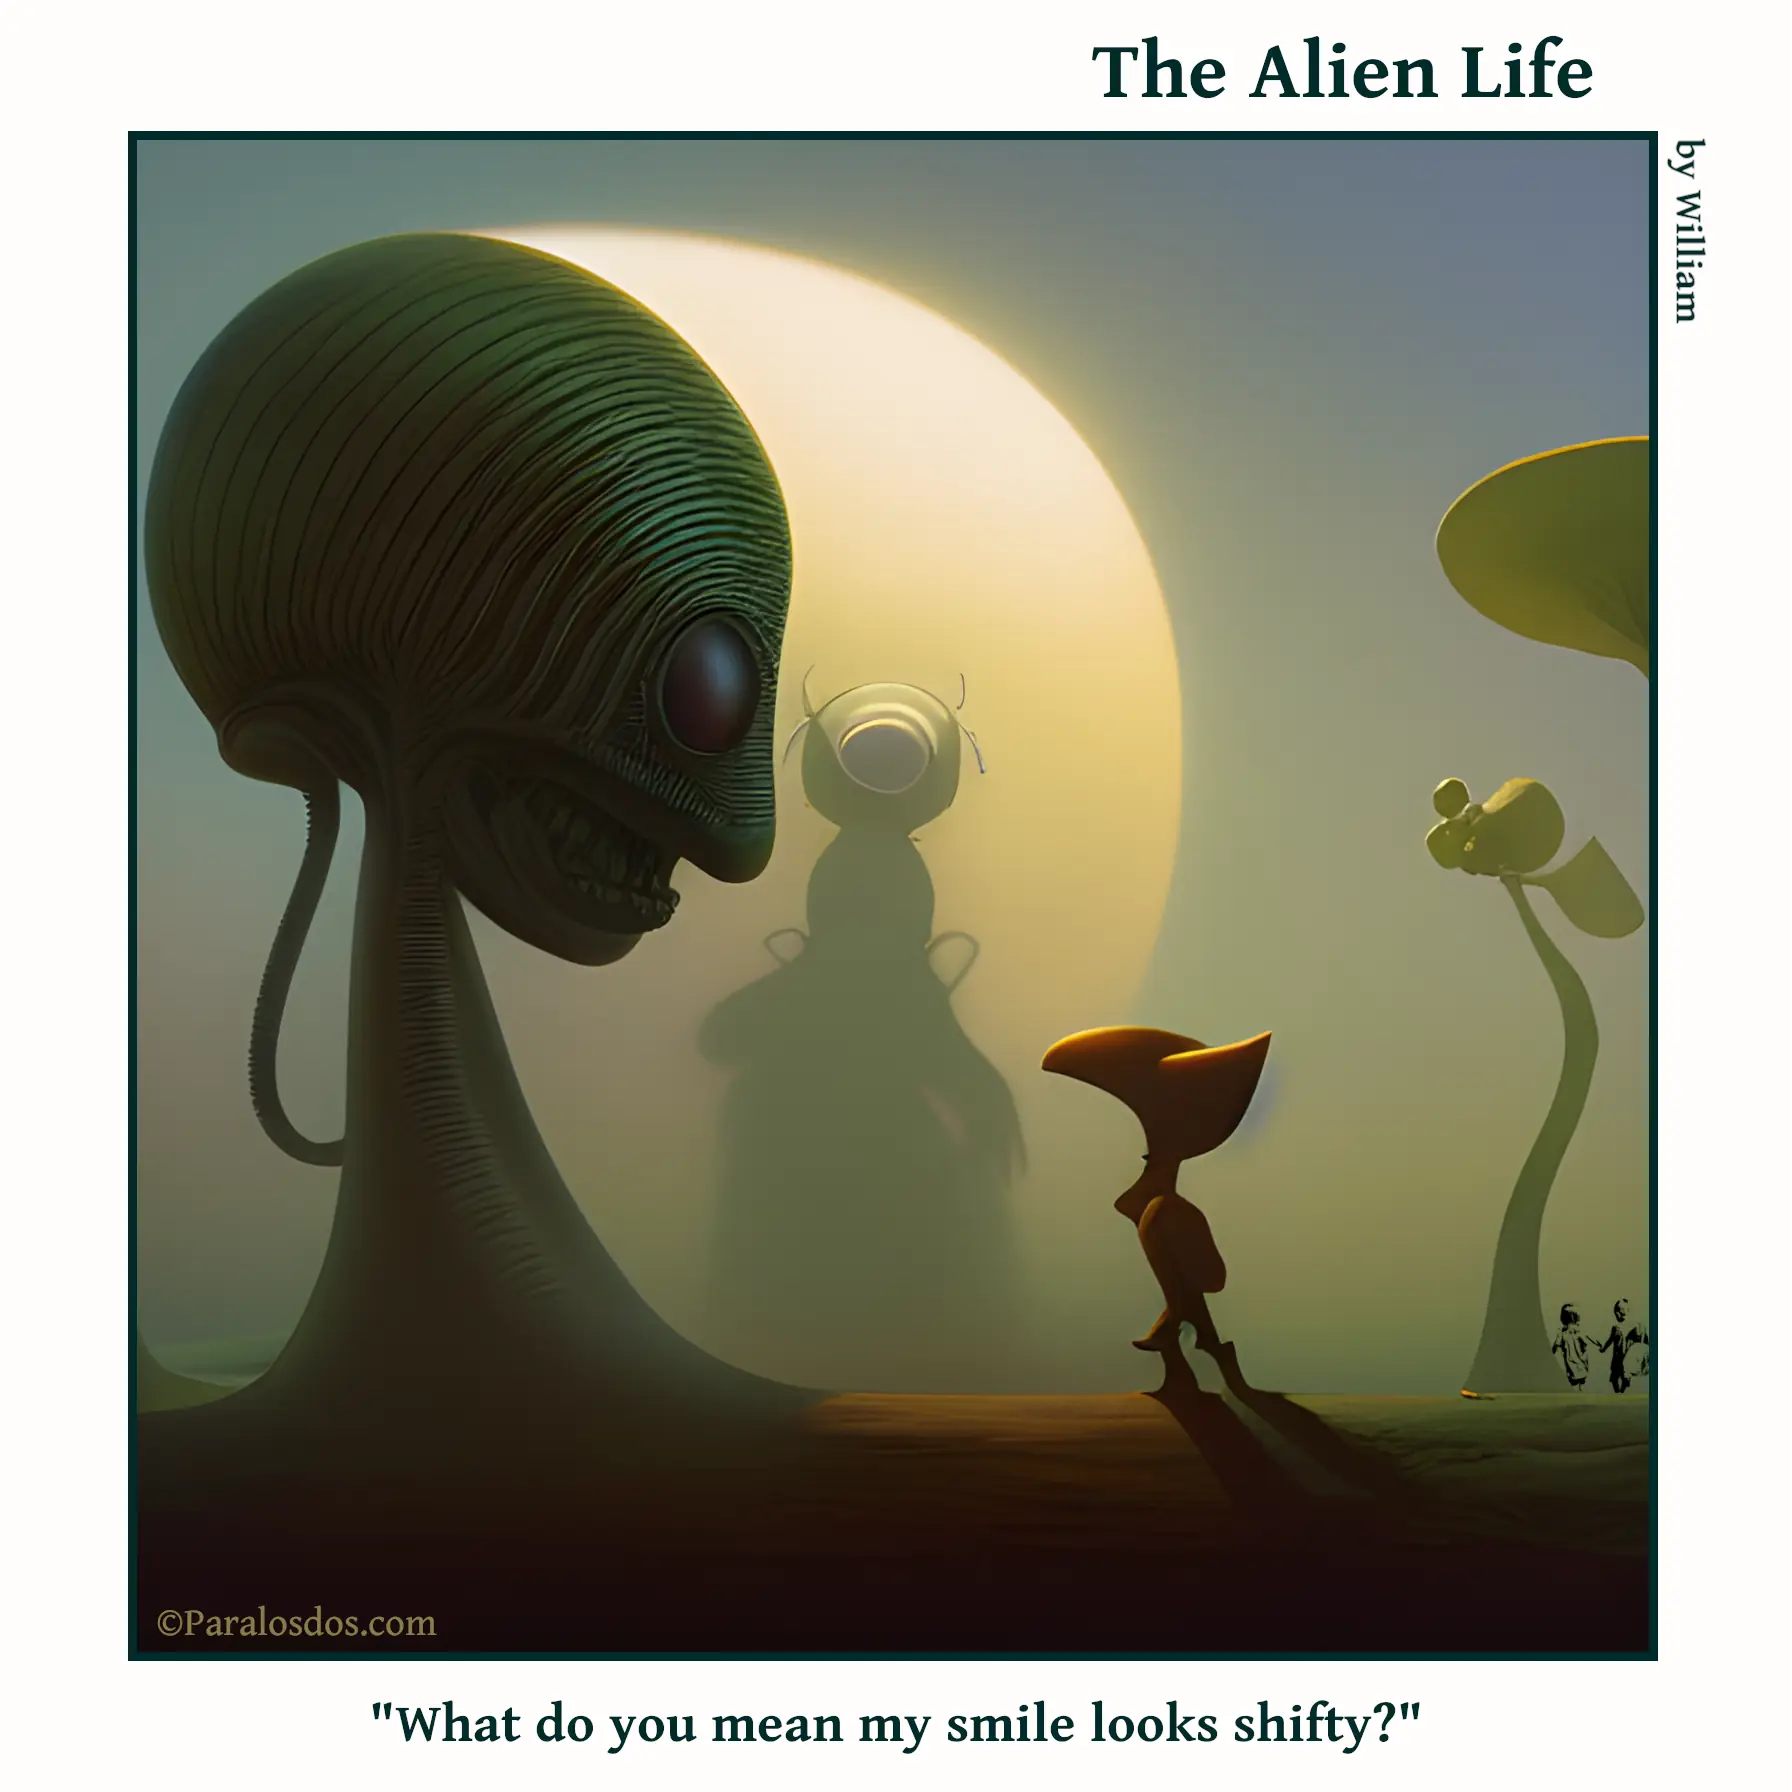 The Alien Life, one panel Comic. An alien with a weird, awkward smile is looking at another alien. The caption reads: "What do you mean my smile looks shifty?"